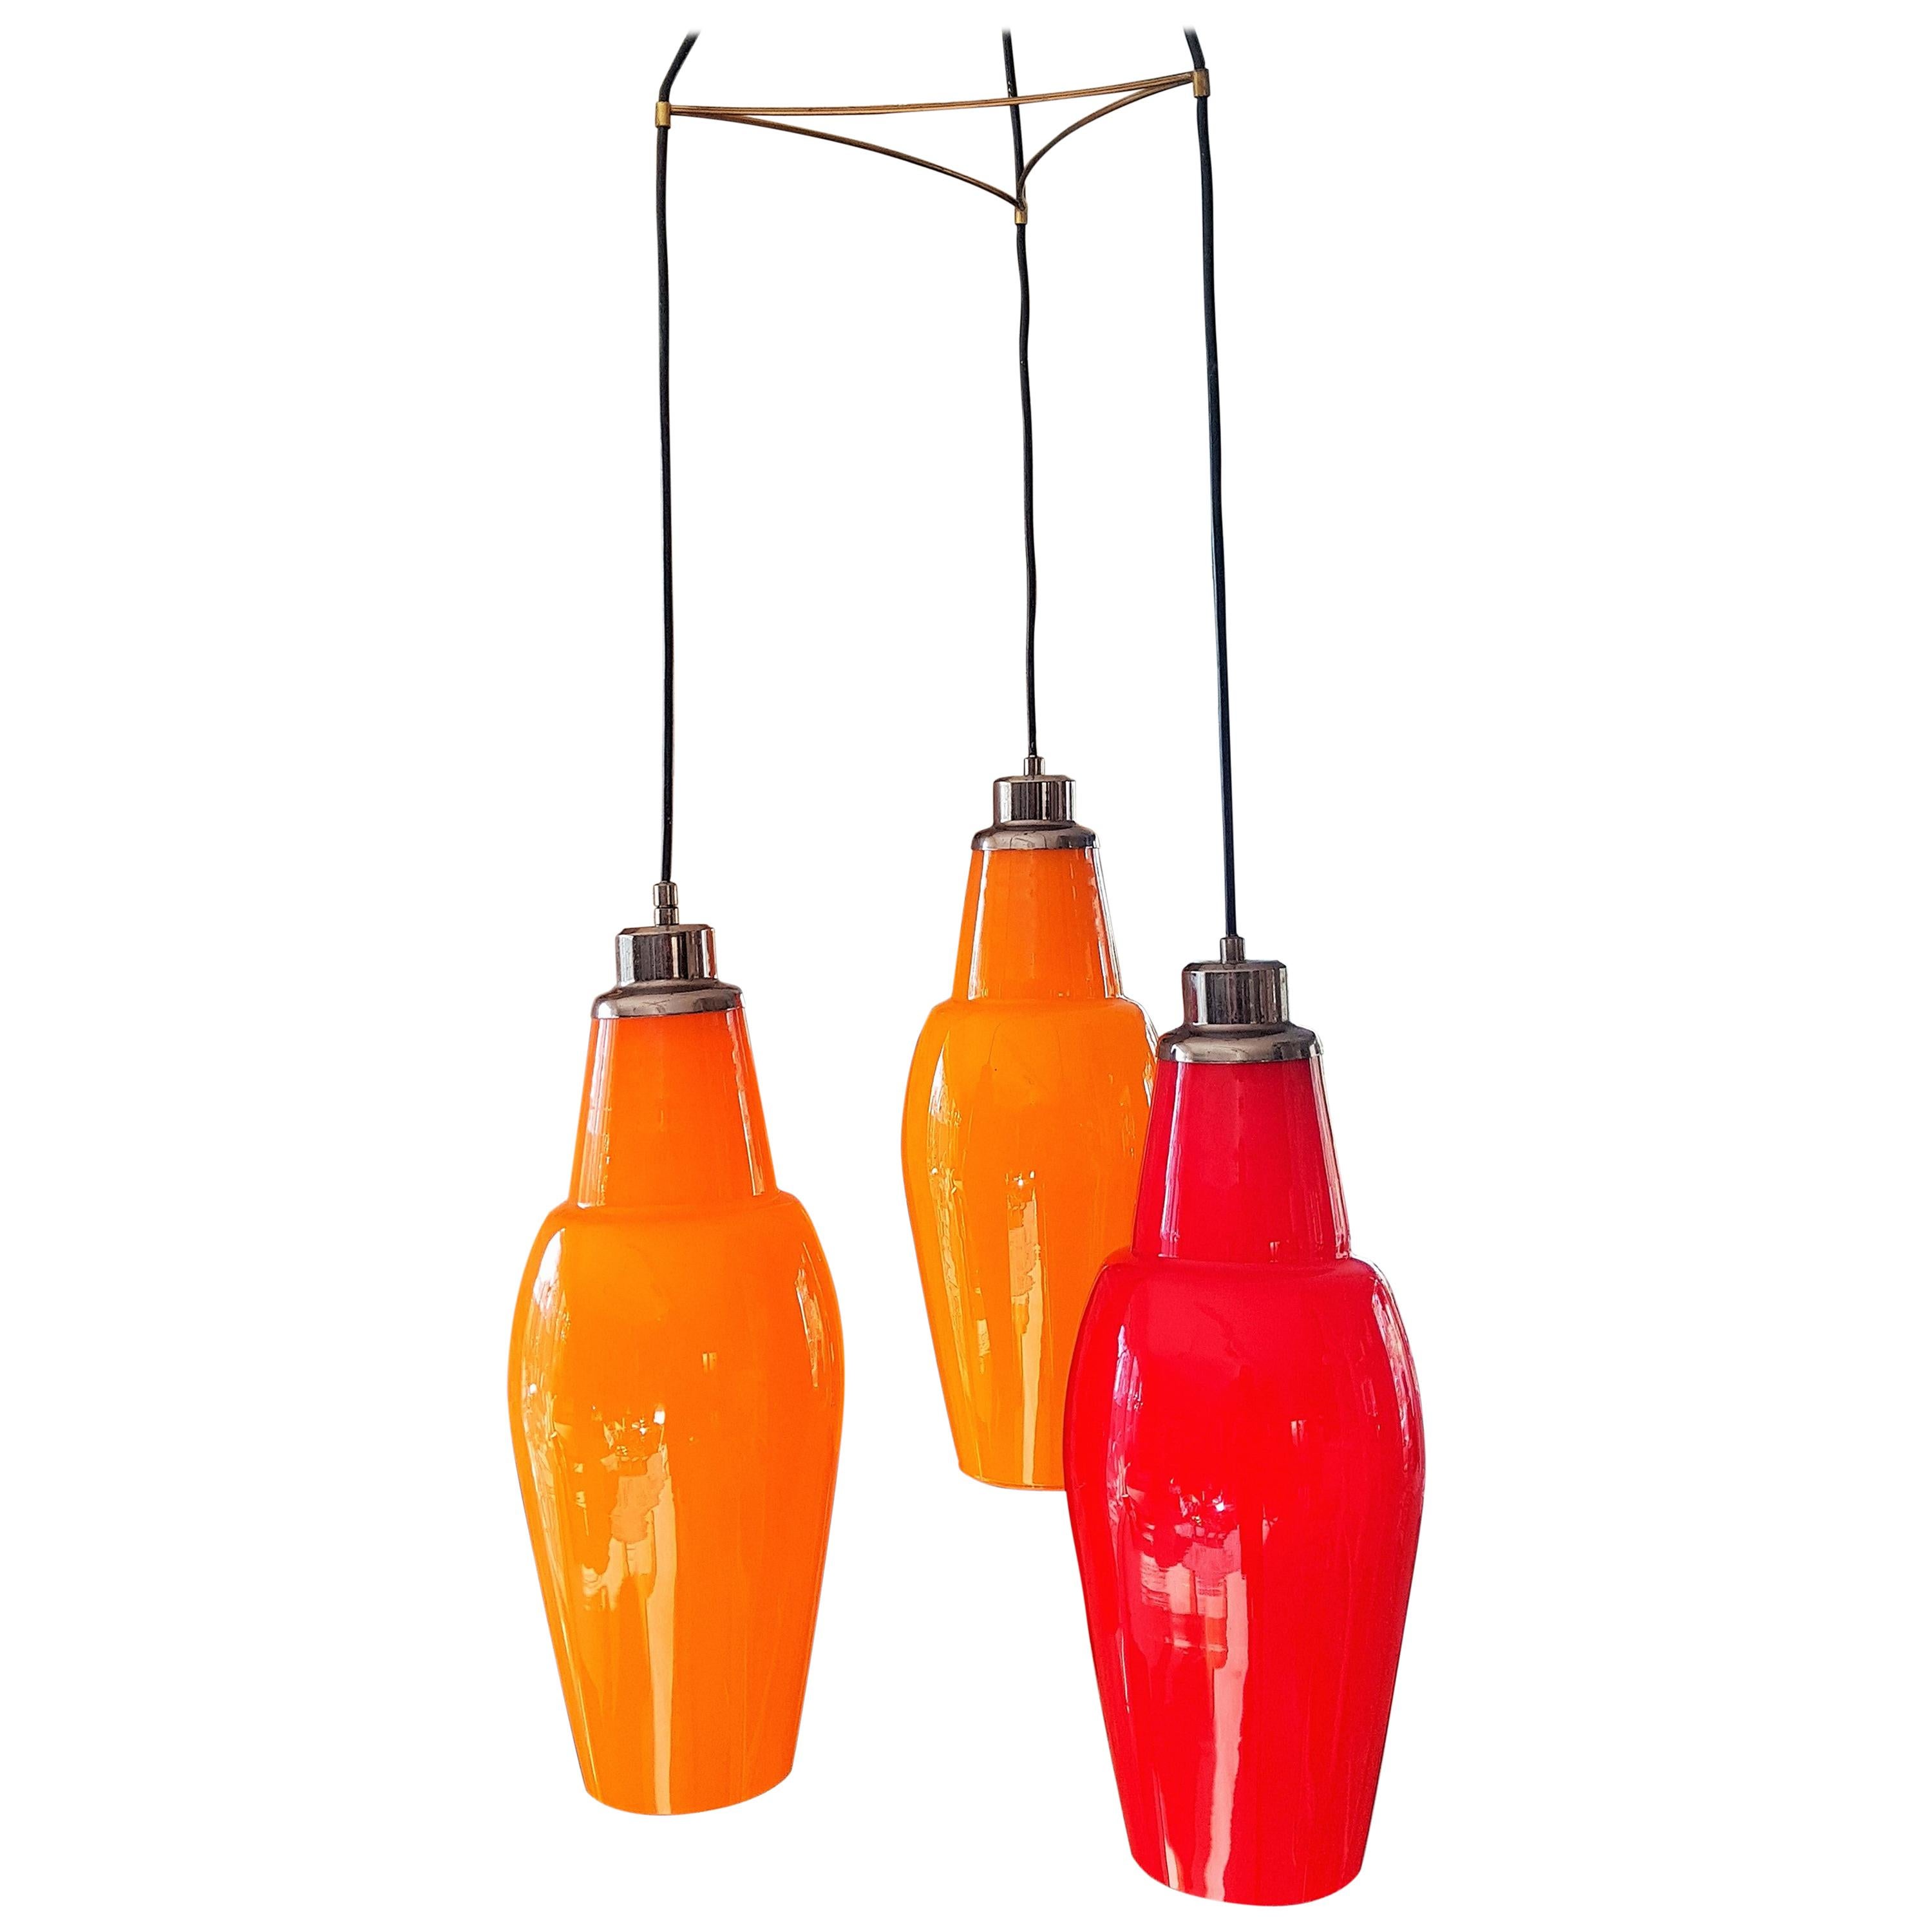 Cascade Midcentury Chandelier Pendant Multi-Color by Vistosi, Italy, 1960s For Sale